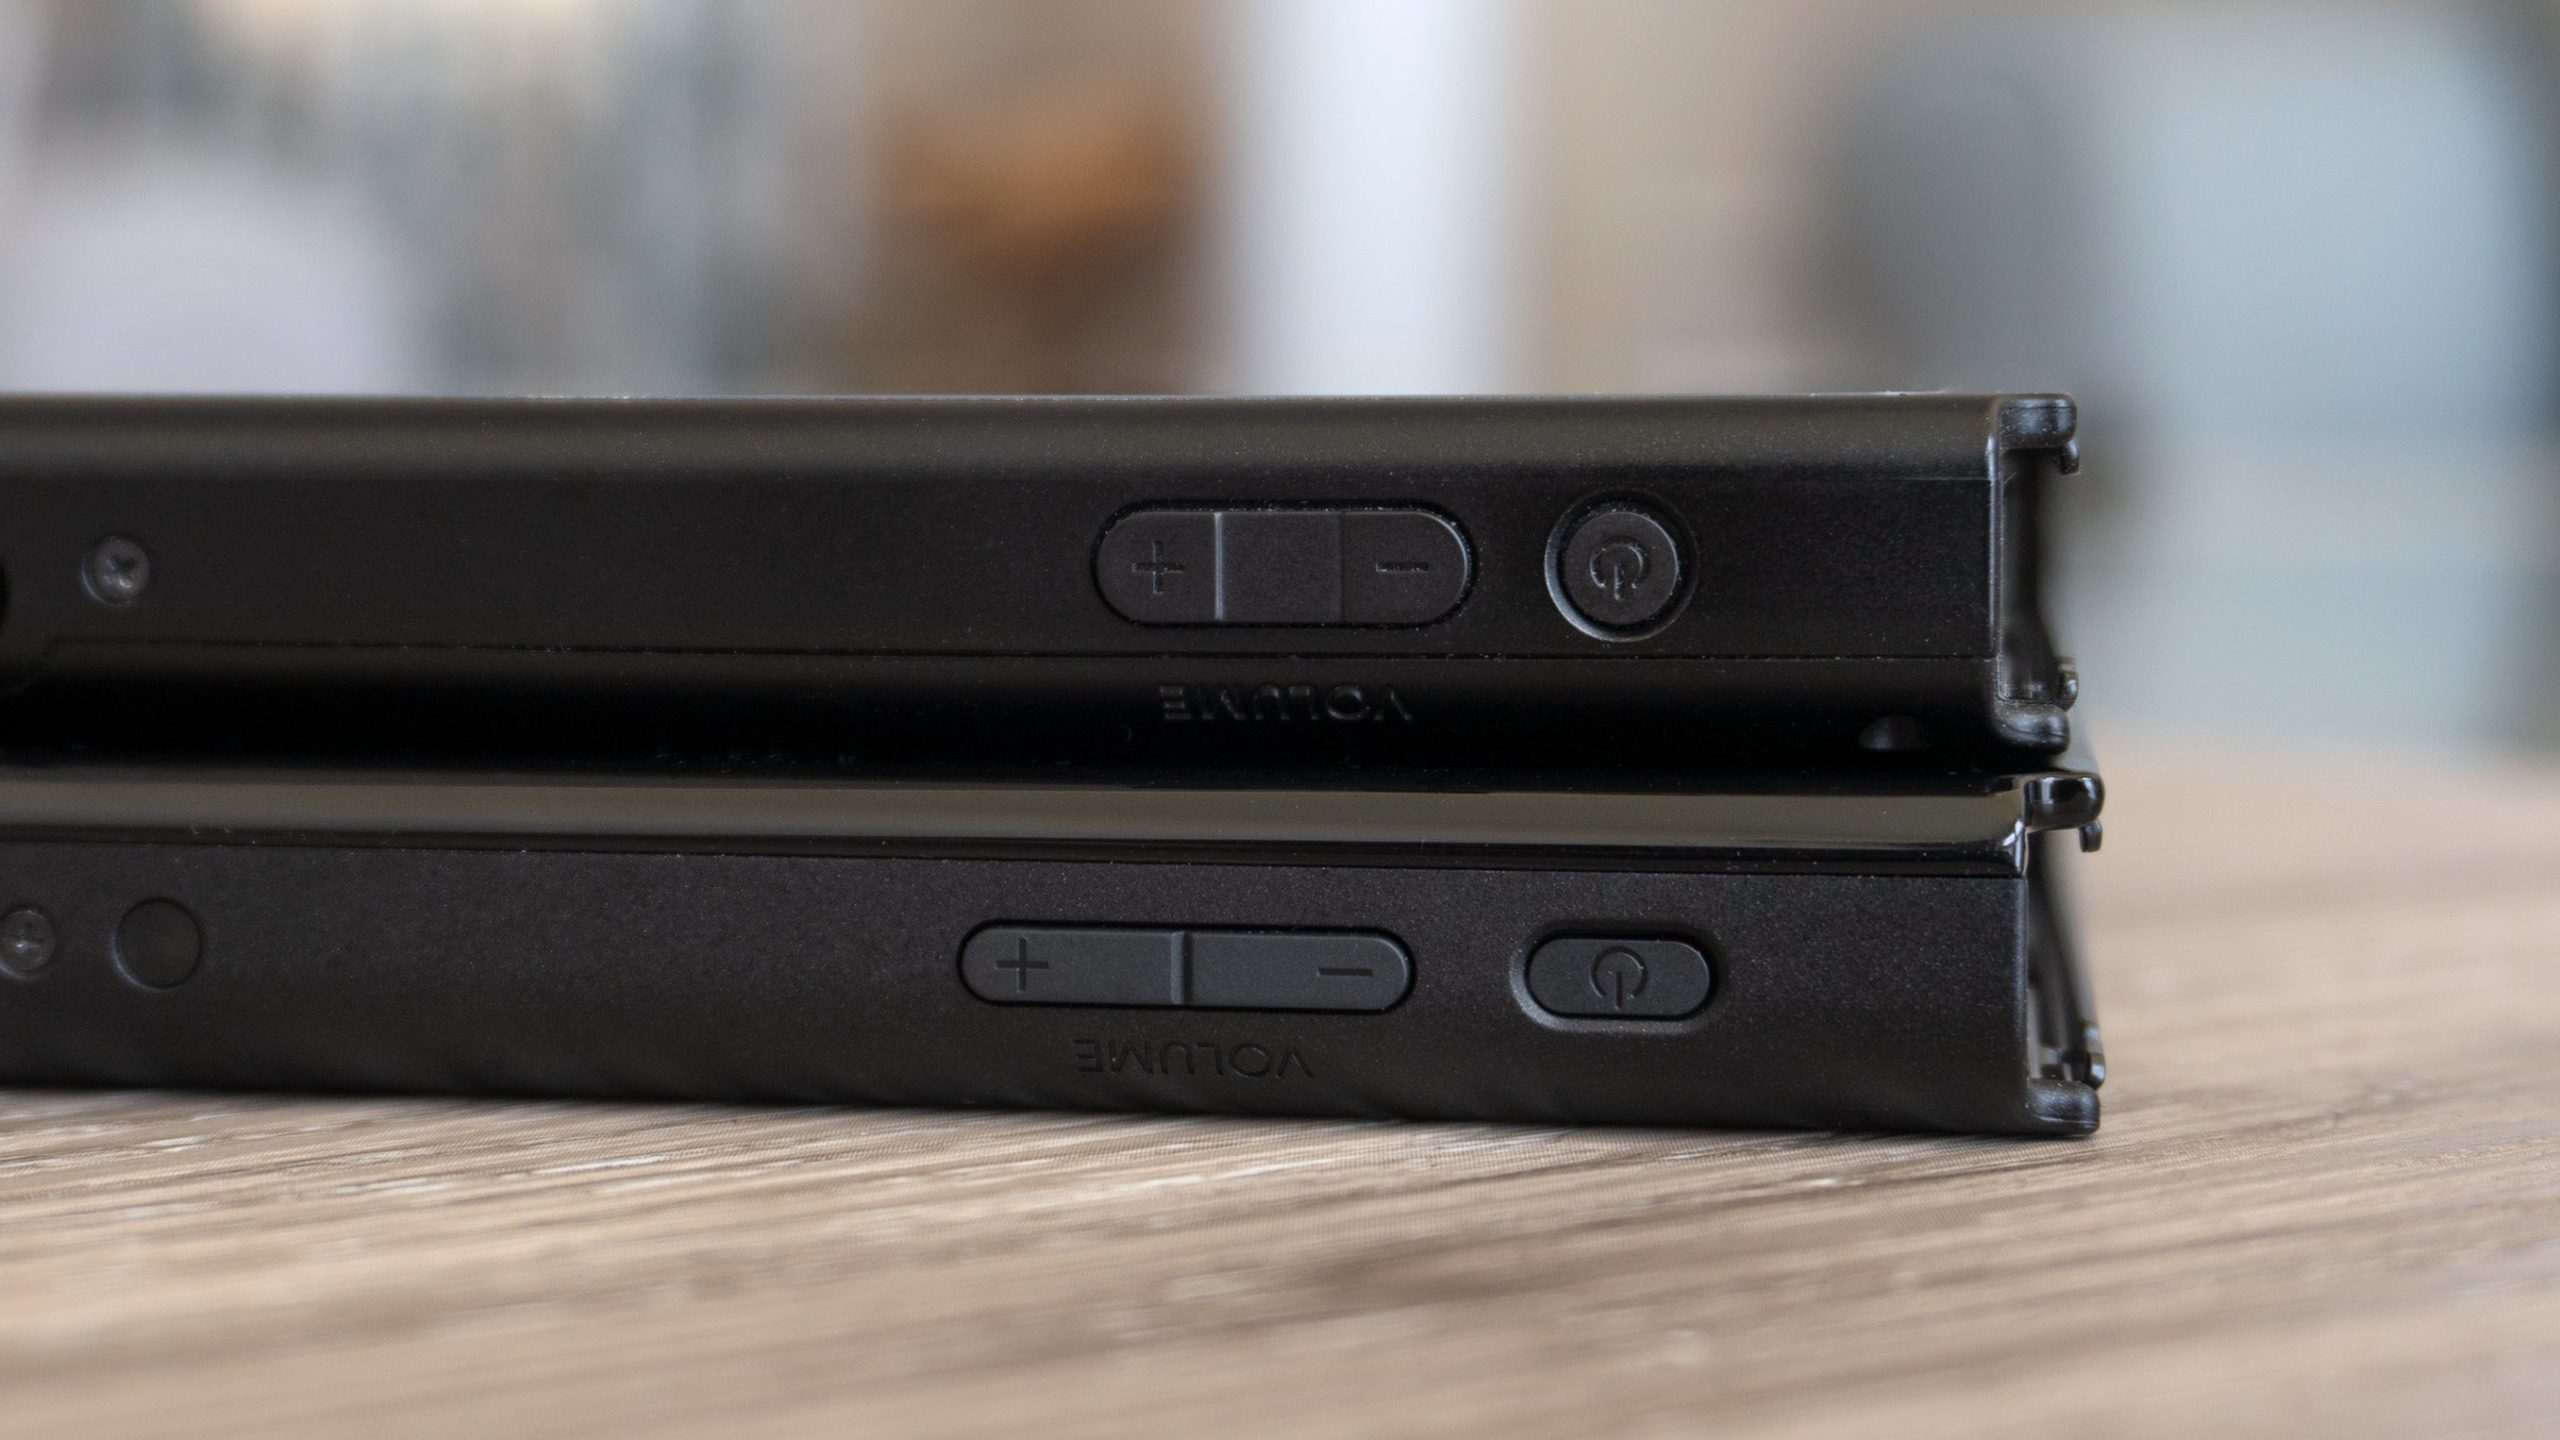 The power and volume buttons on the new Switch OLED (bottom) are slightly longer than those on the original Switch (top). (Photo: Andrew Liszewski - Gizmodo)